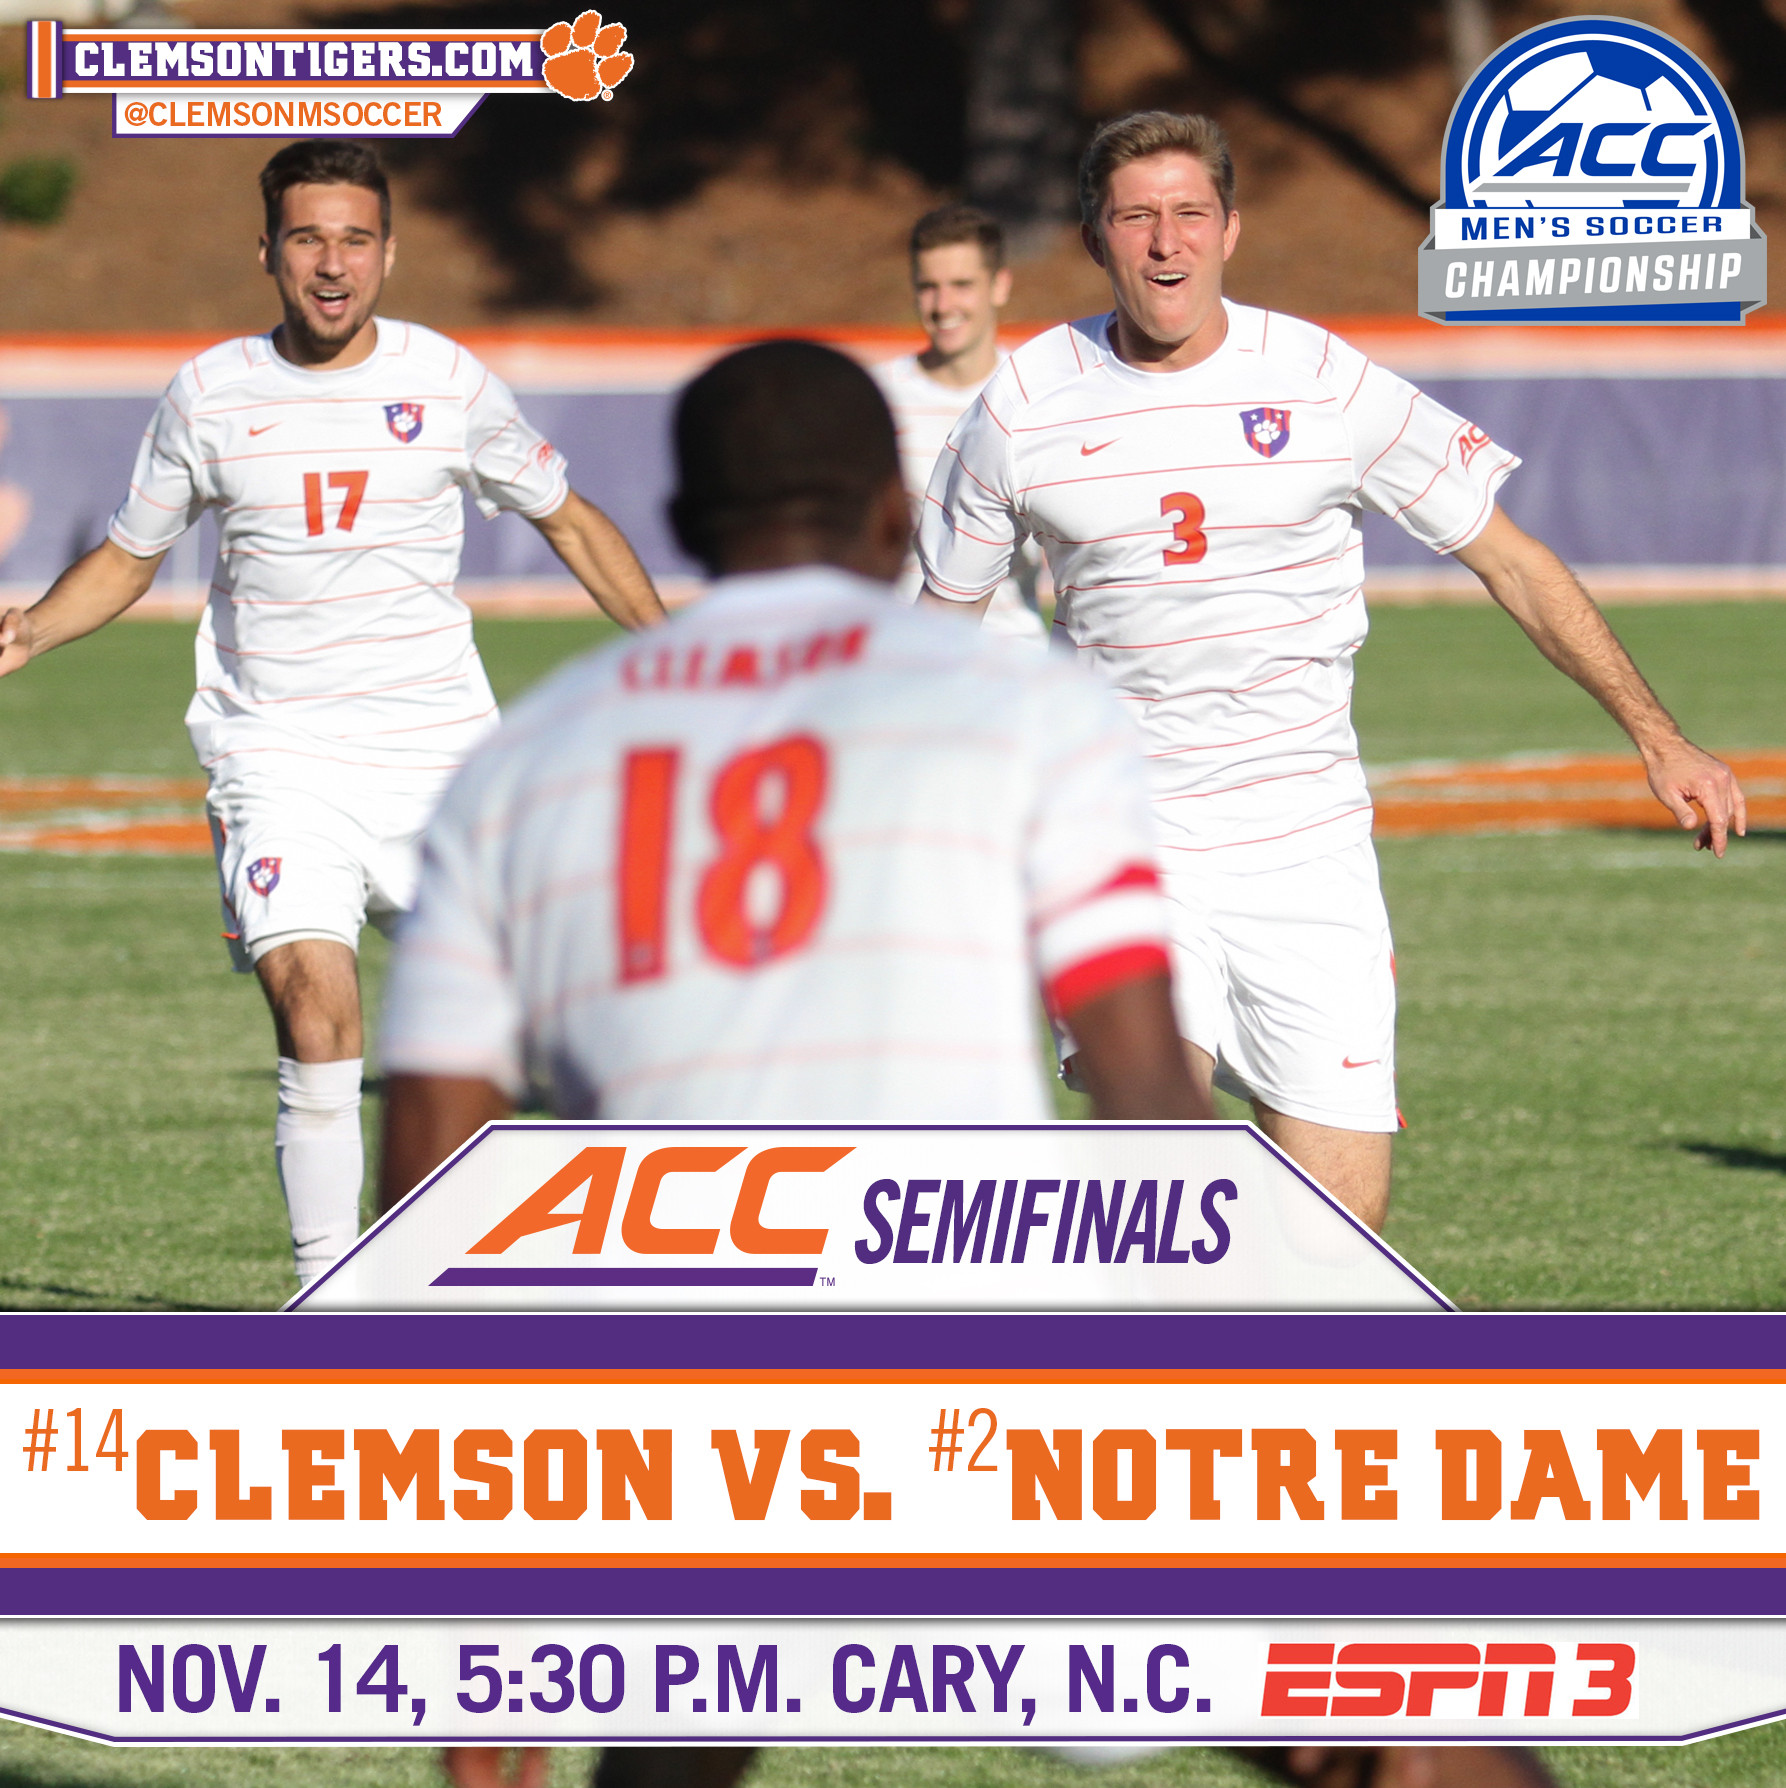 No. 14 Clemson Meets No. 2 Notre Dame in ACC Semifinal Match on Friday